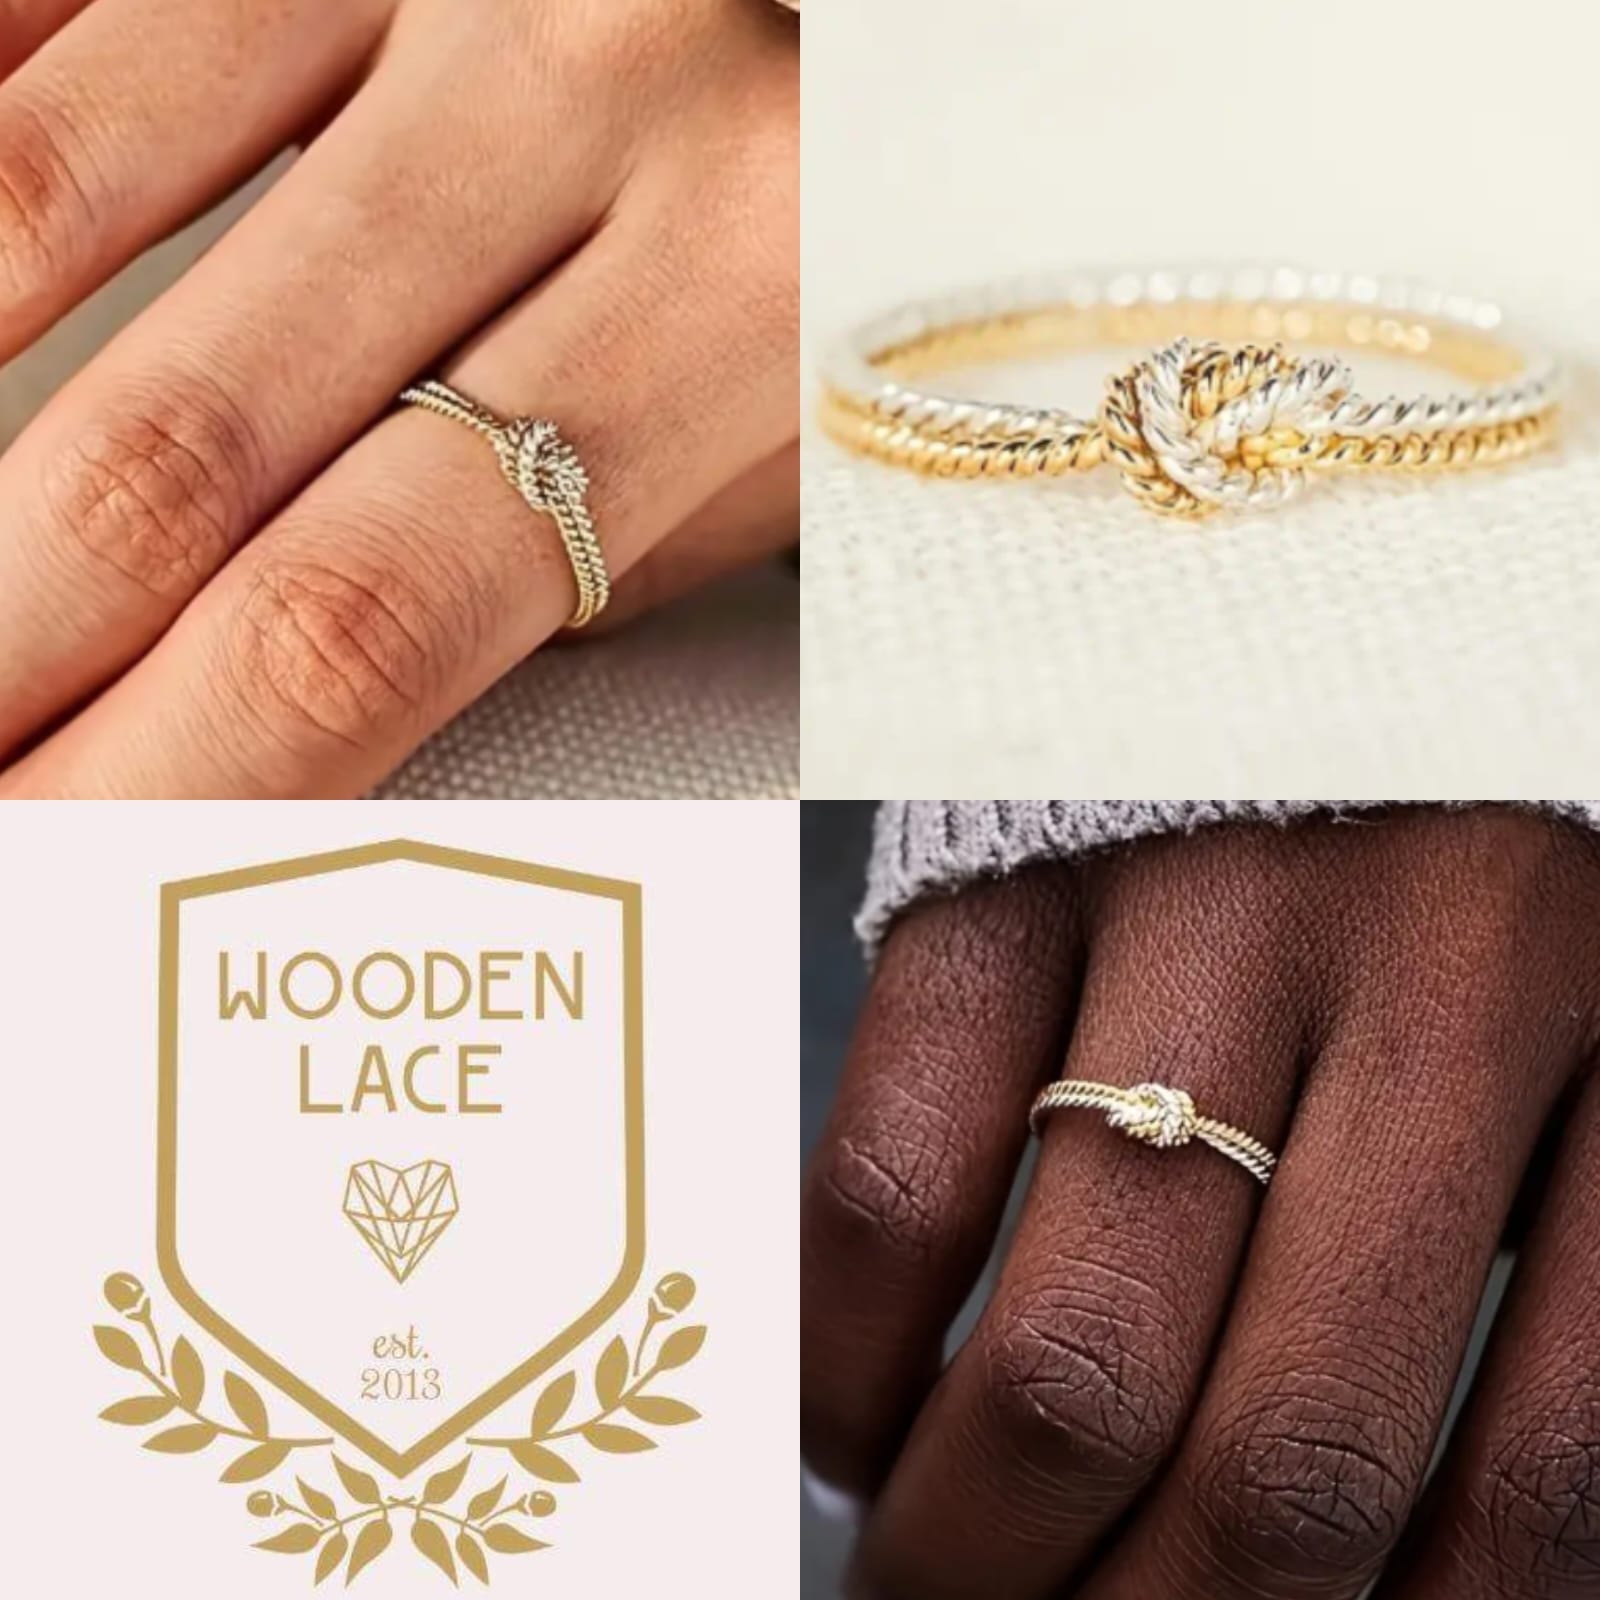 Tie the knot promise ring sterling silver 925 and 18k gold R950. Different sizes available.